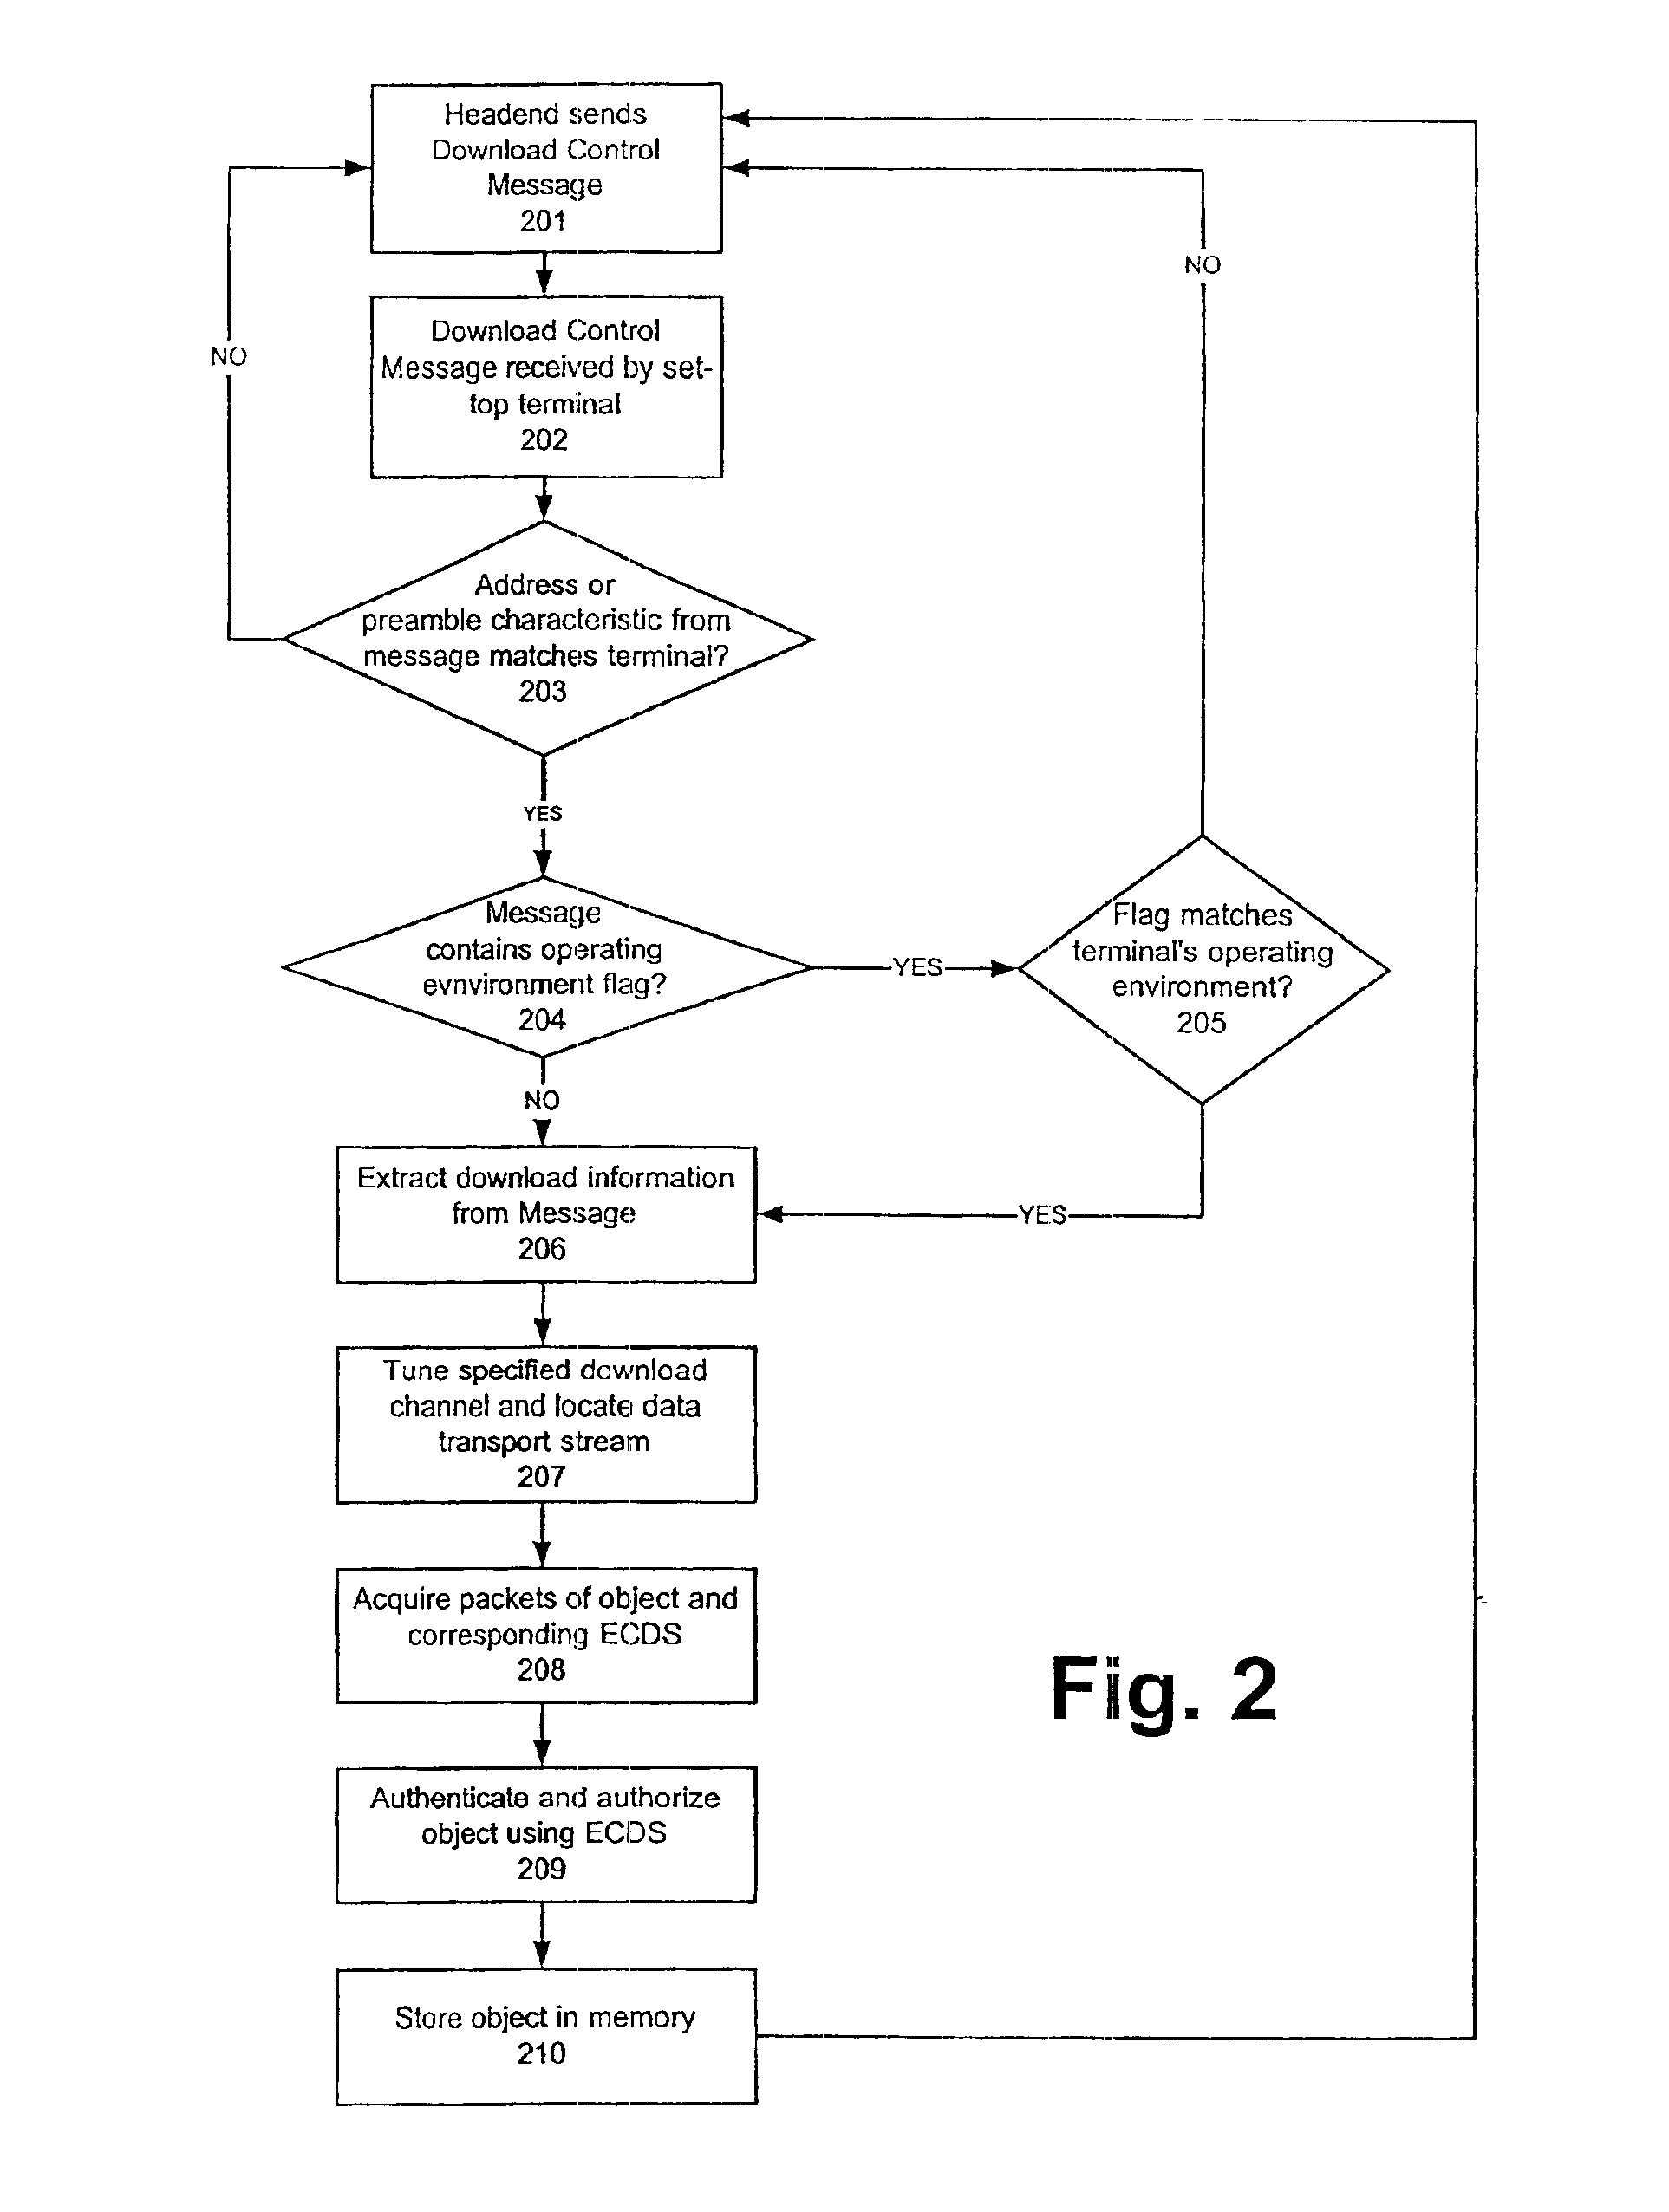 Method and system for directing the download of software and firmware objects over a network such as a cable television system